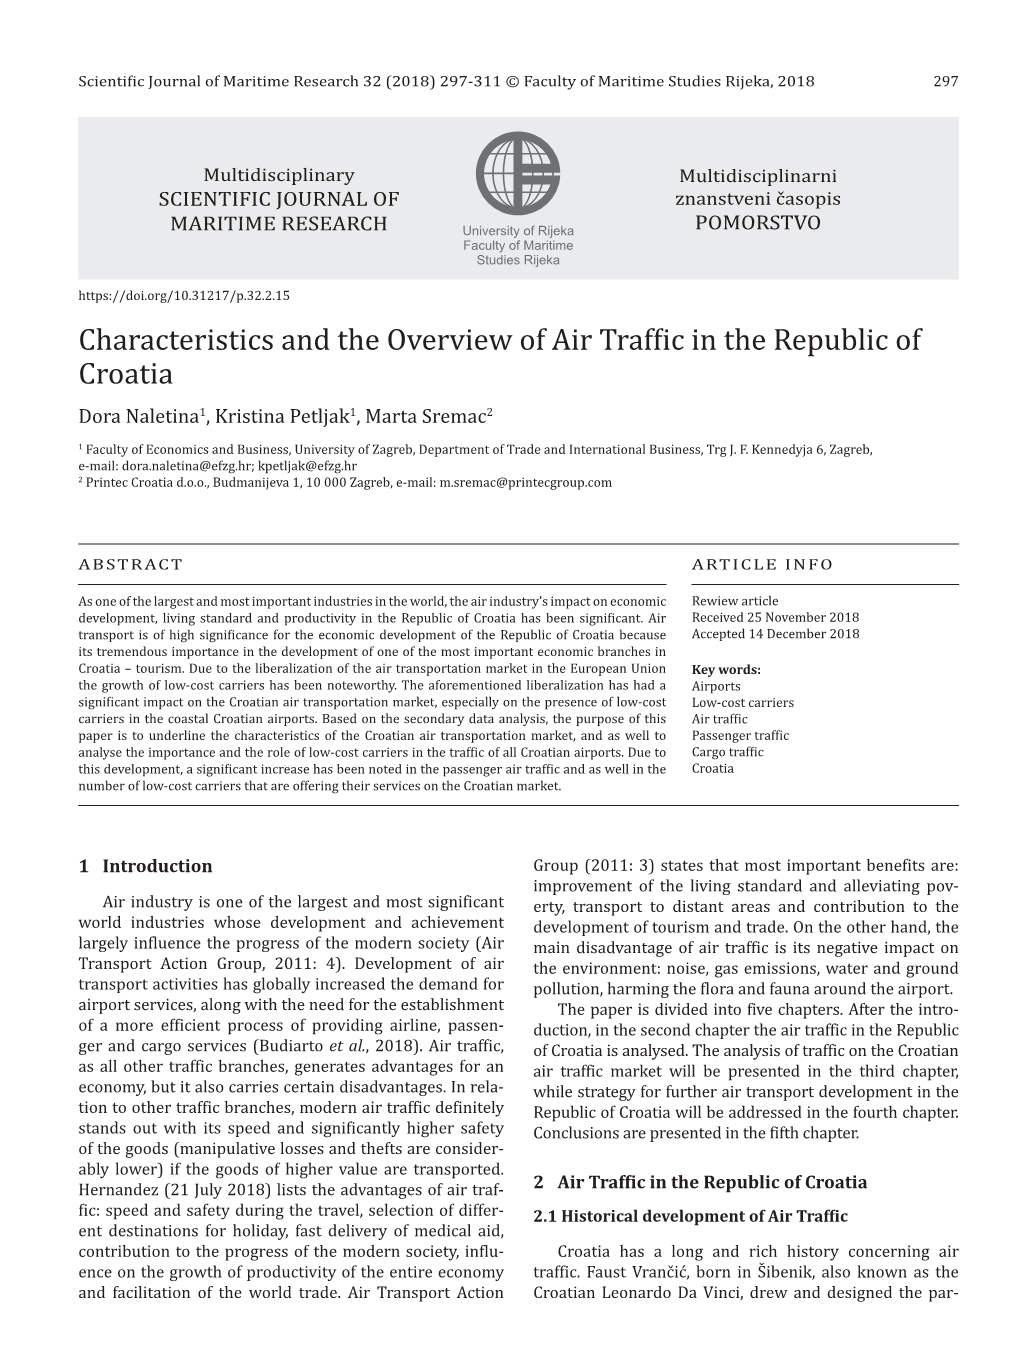 Characteristics and the Overview of Air Traffic in the Republic of Croatia